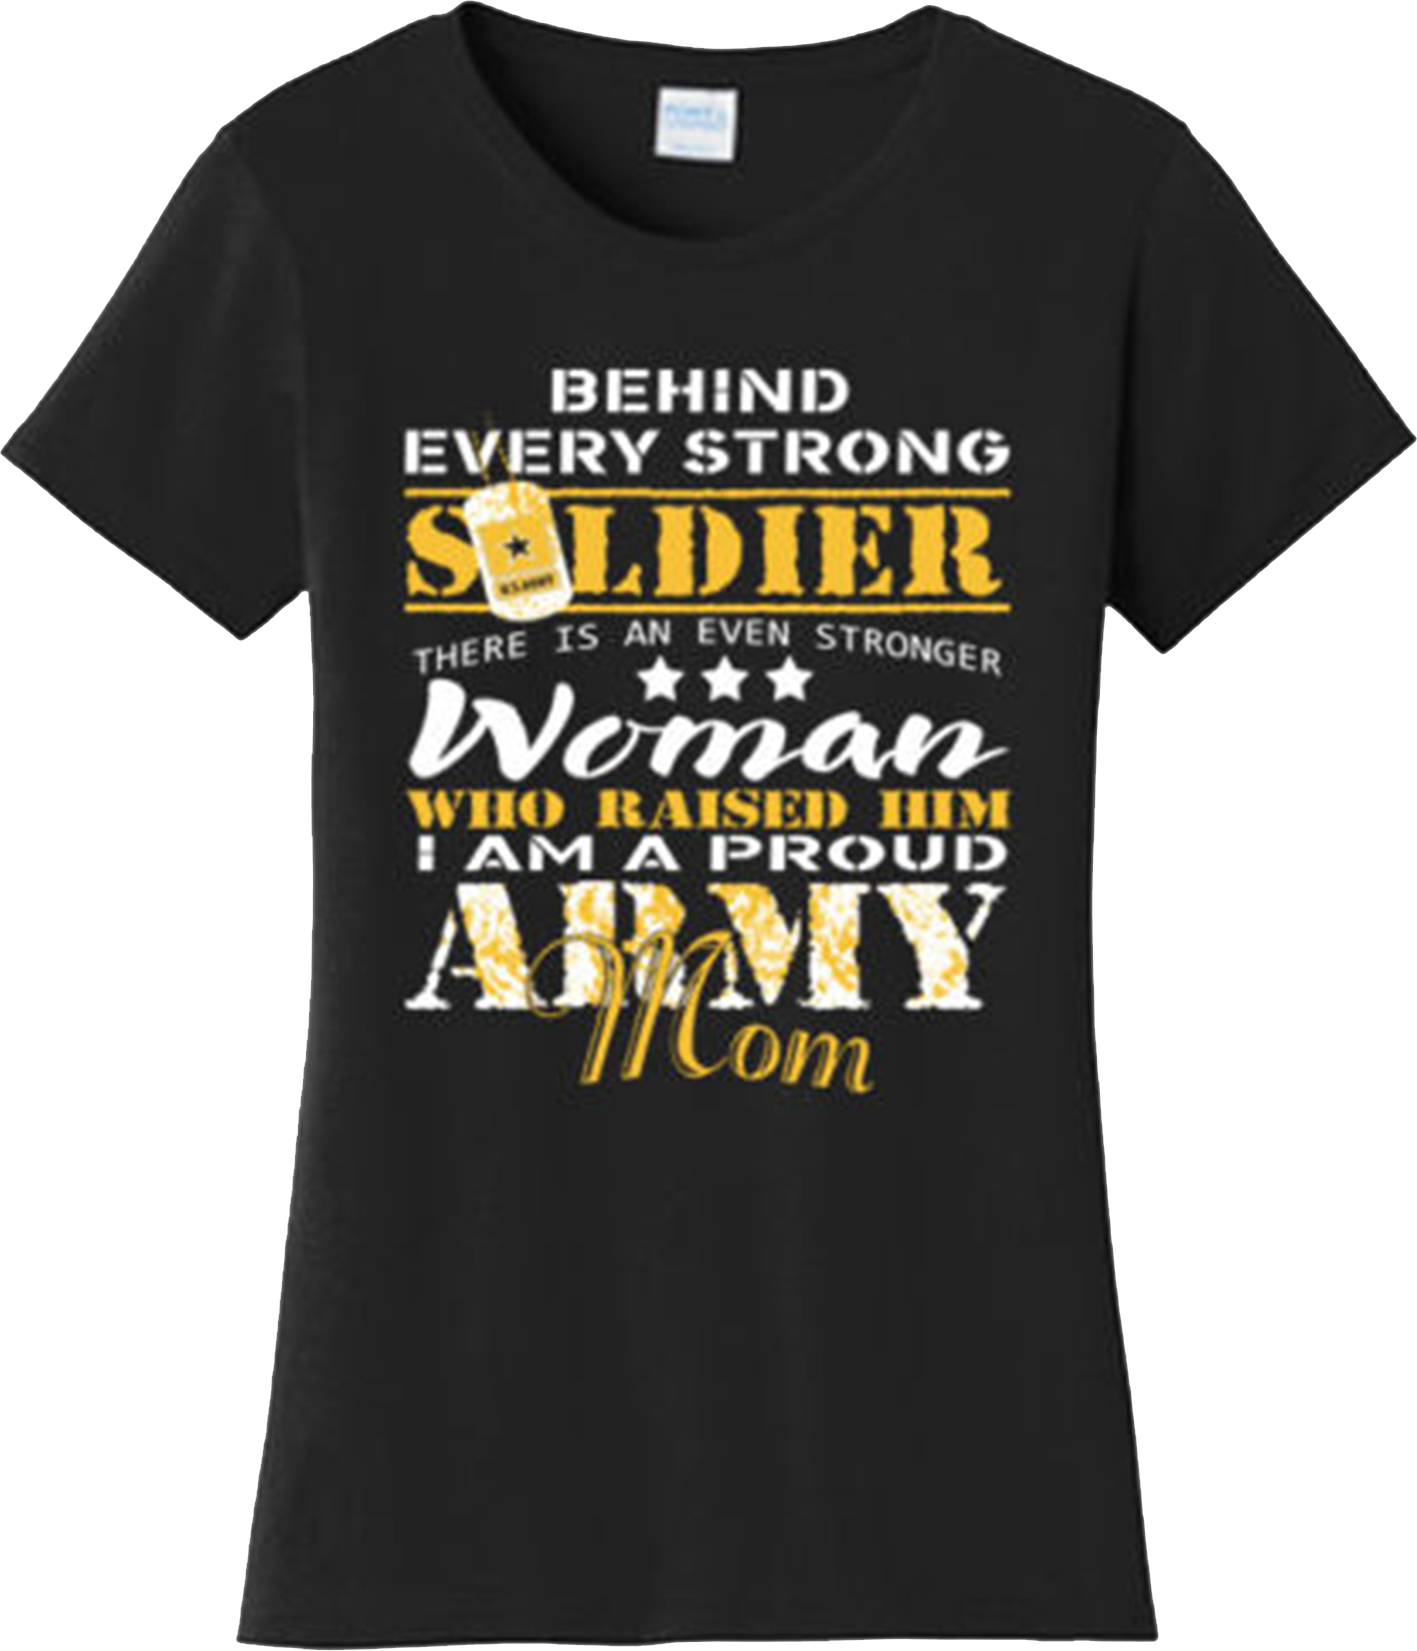 Army Son Mom  Military Patriotic American T Shirt  New Graphic Tee